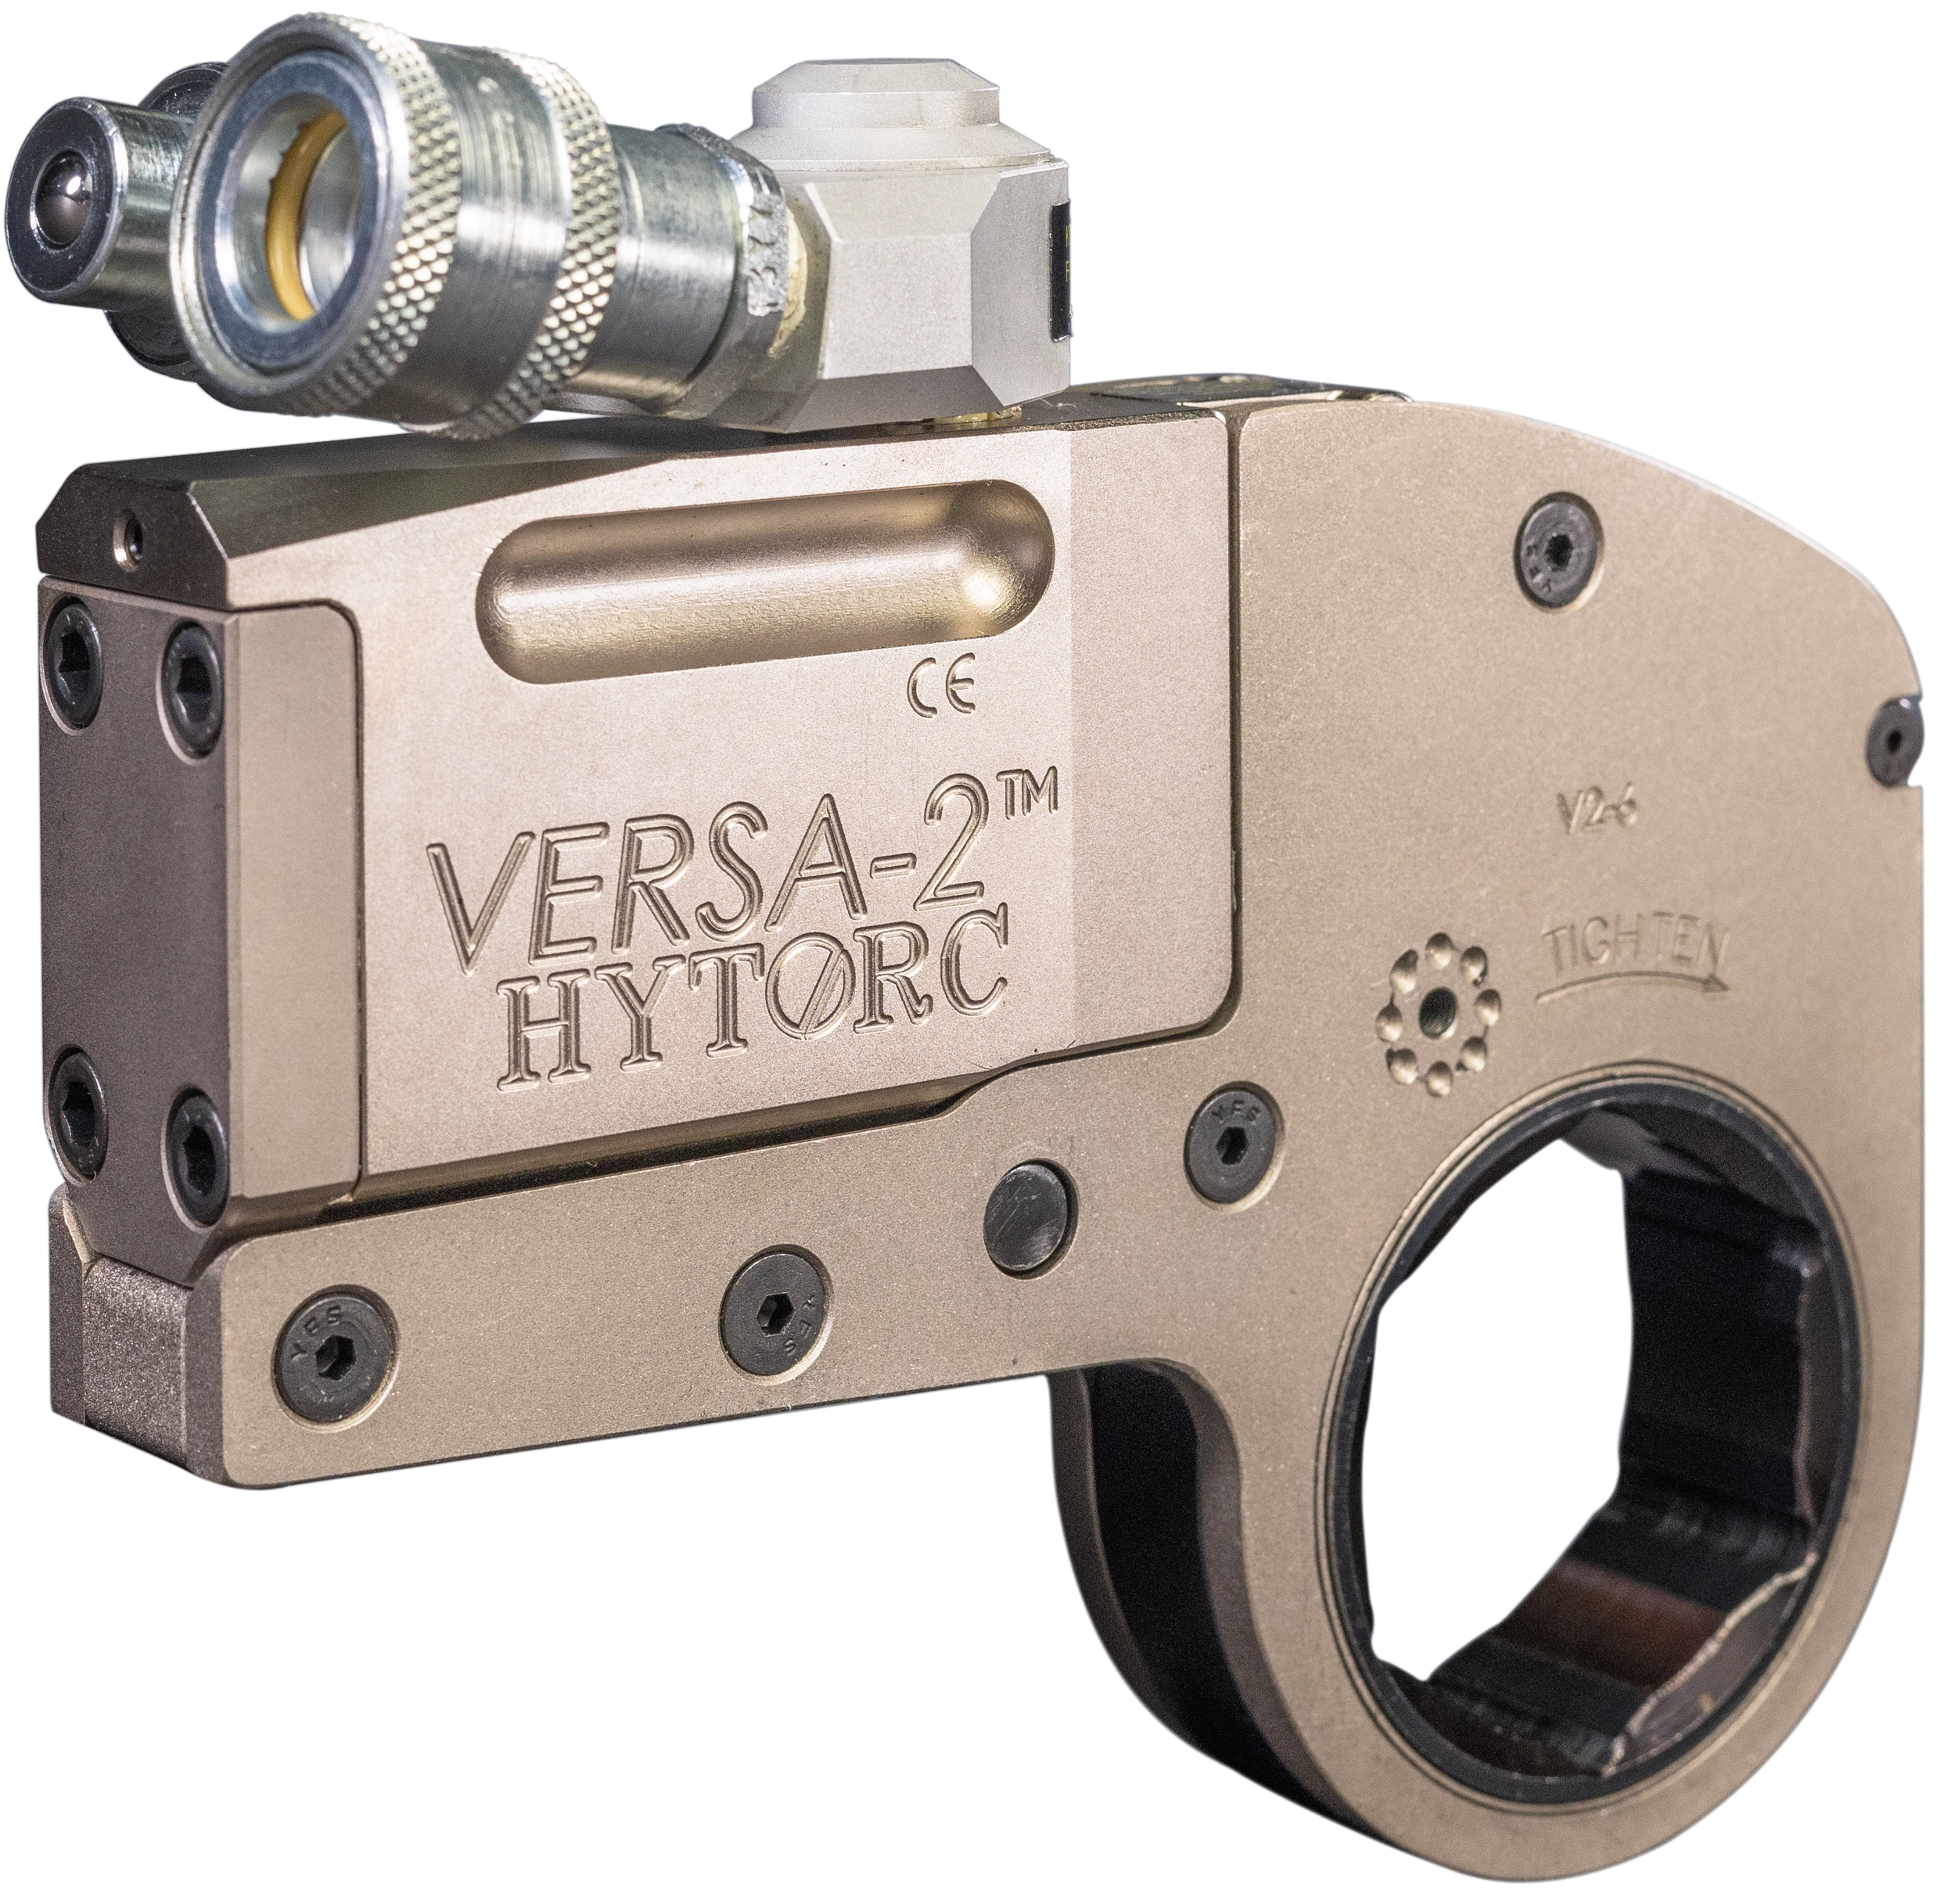 The VERSA low clearance hydraulic torque wrench